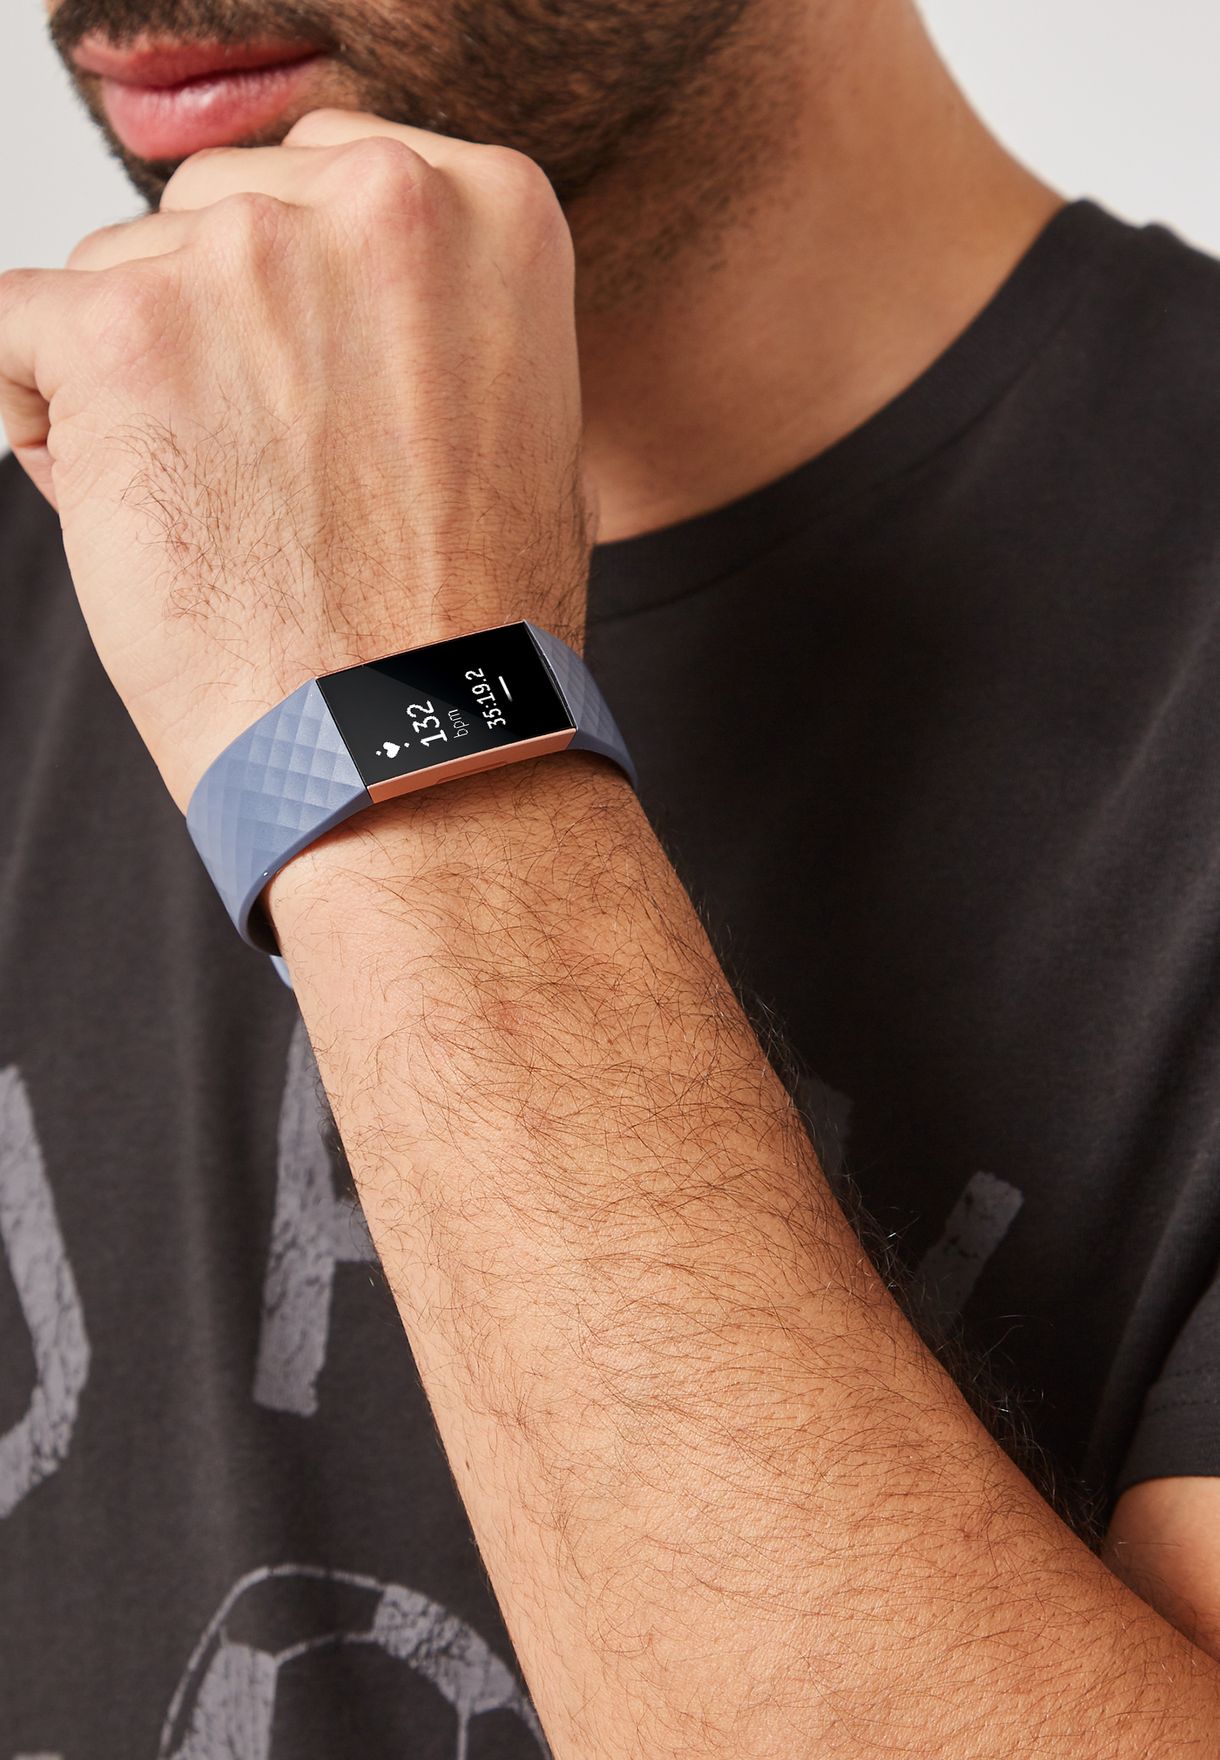 fitbit charge 3 mens